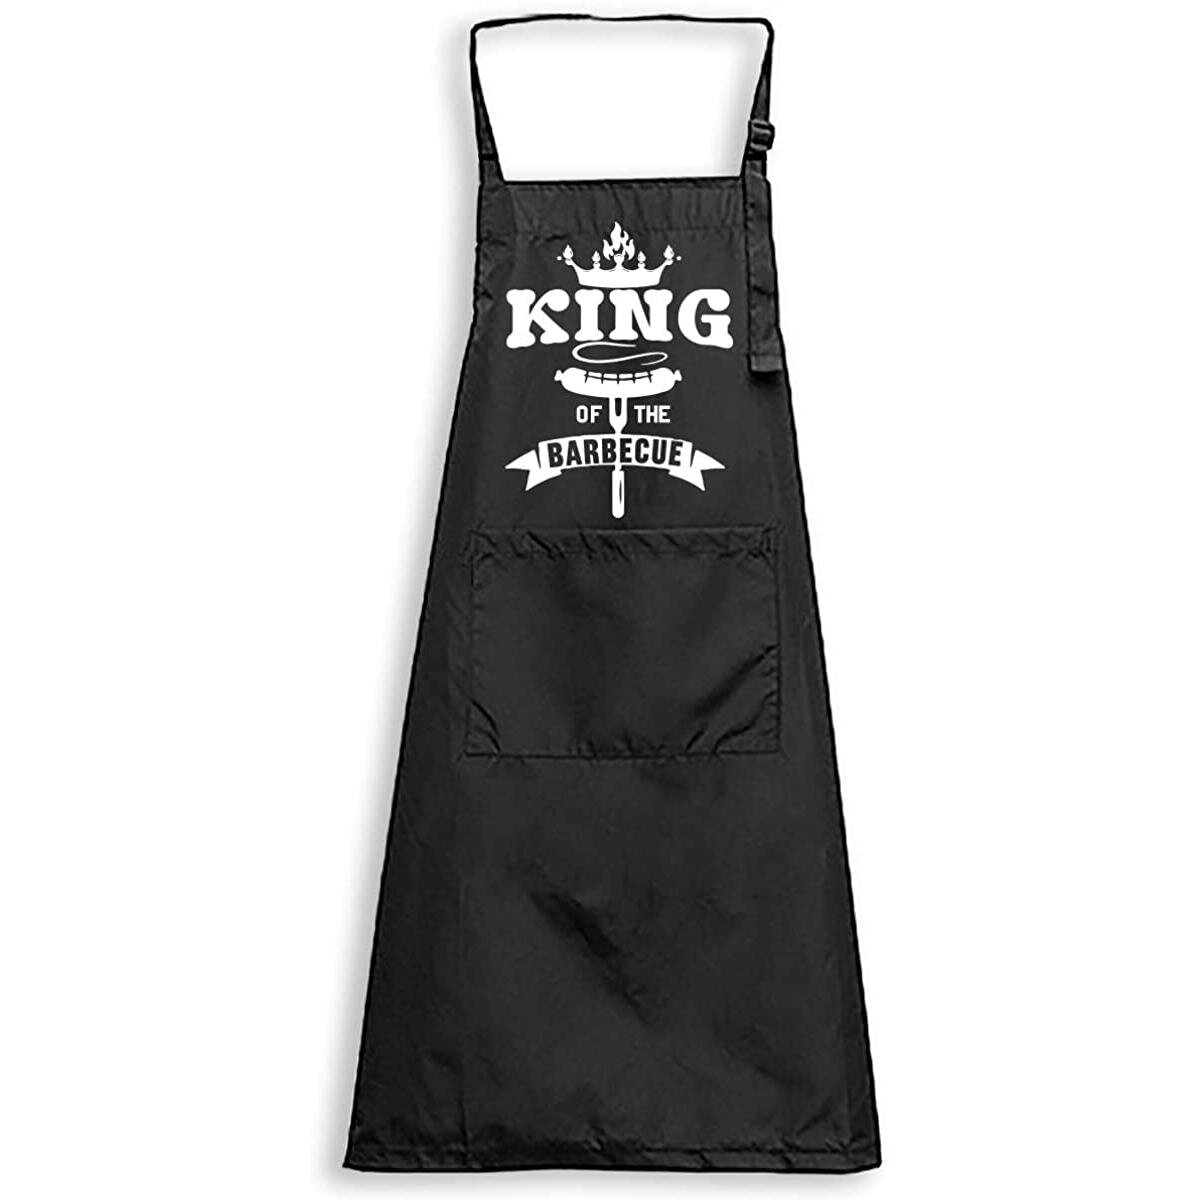 Splashproof Novelty Apron The Grill Father Cooking Painting Art Kitchen BBQ Gift 